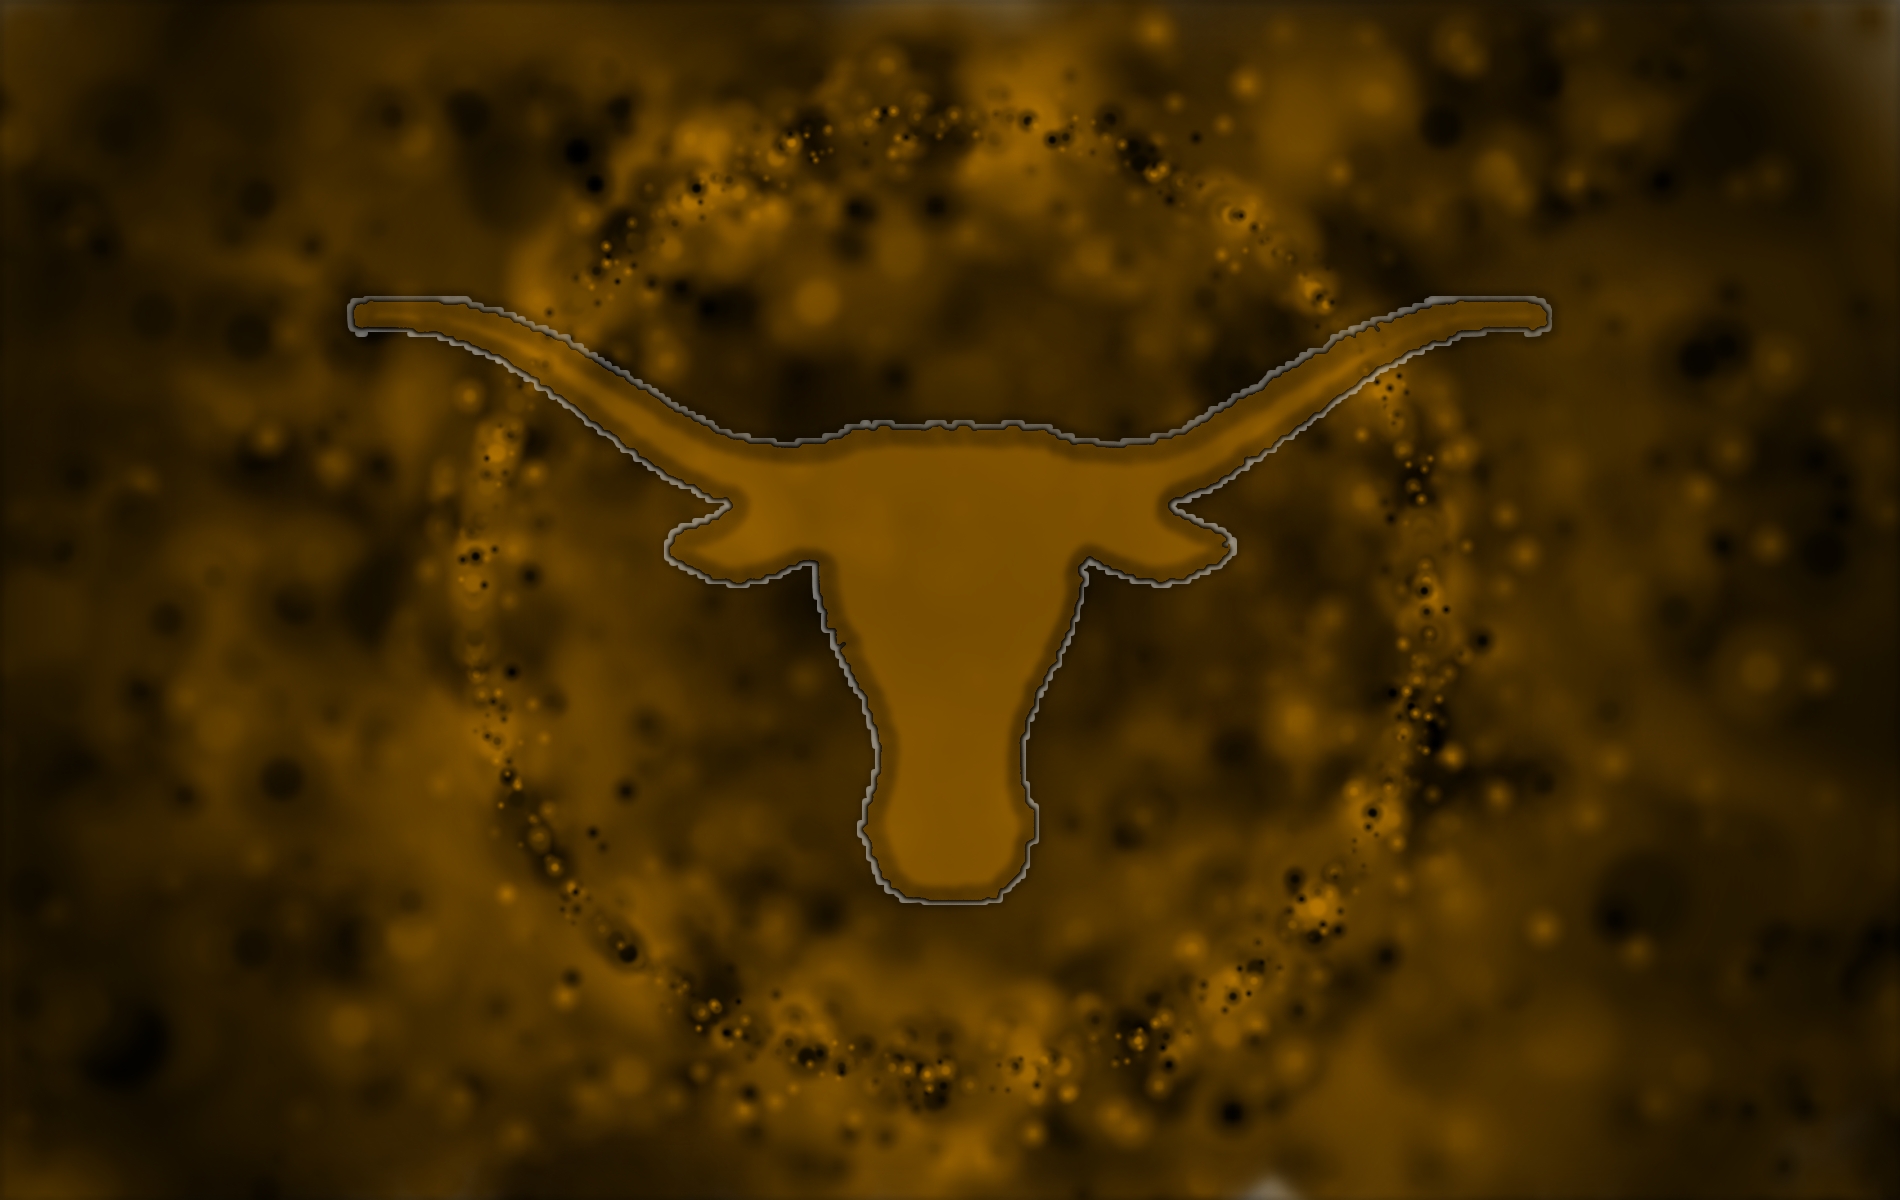 Texas Longhorns with abstract background